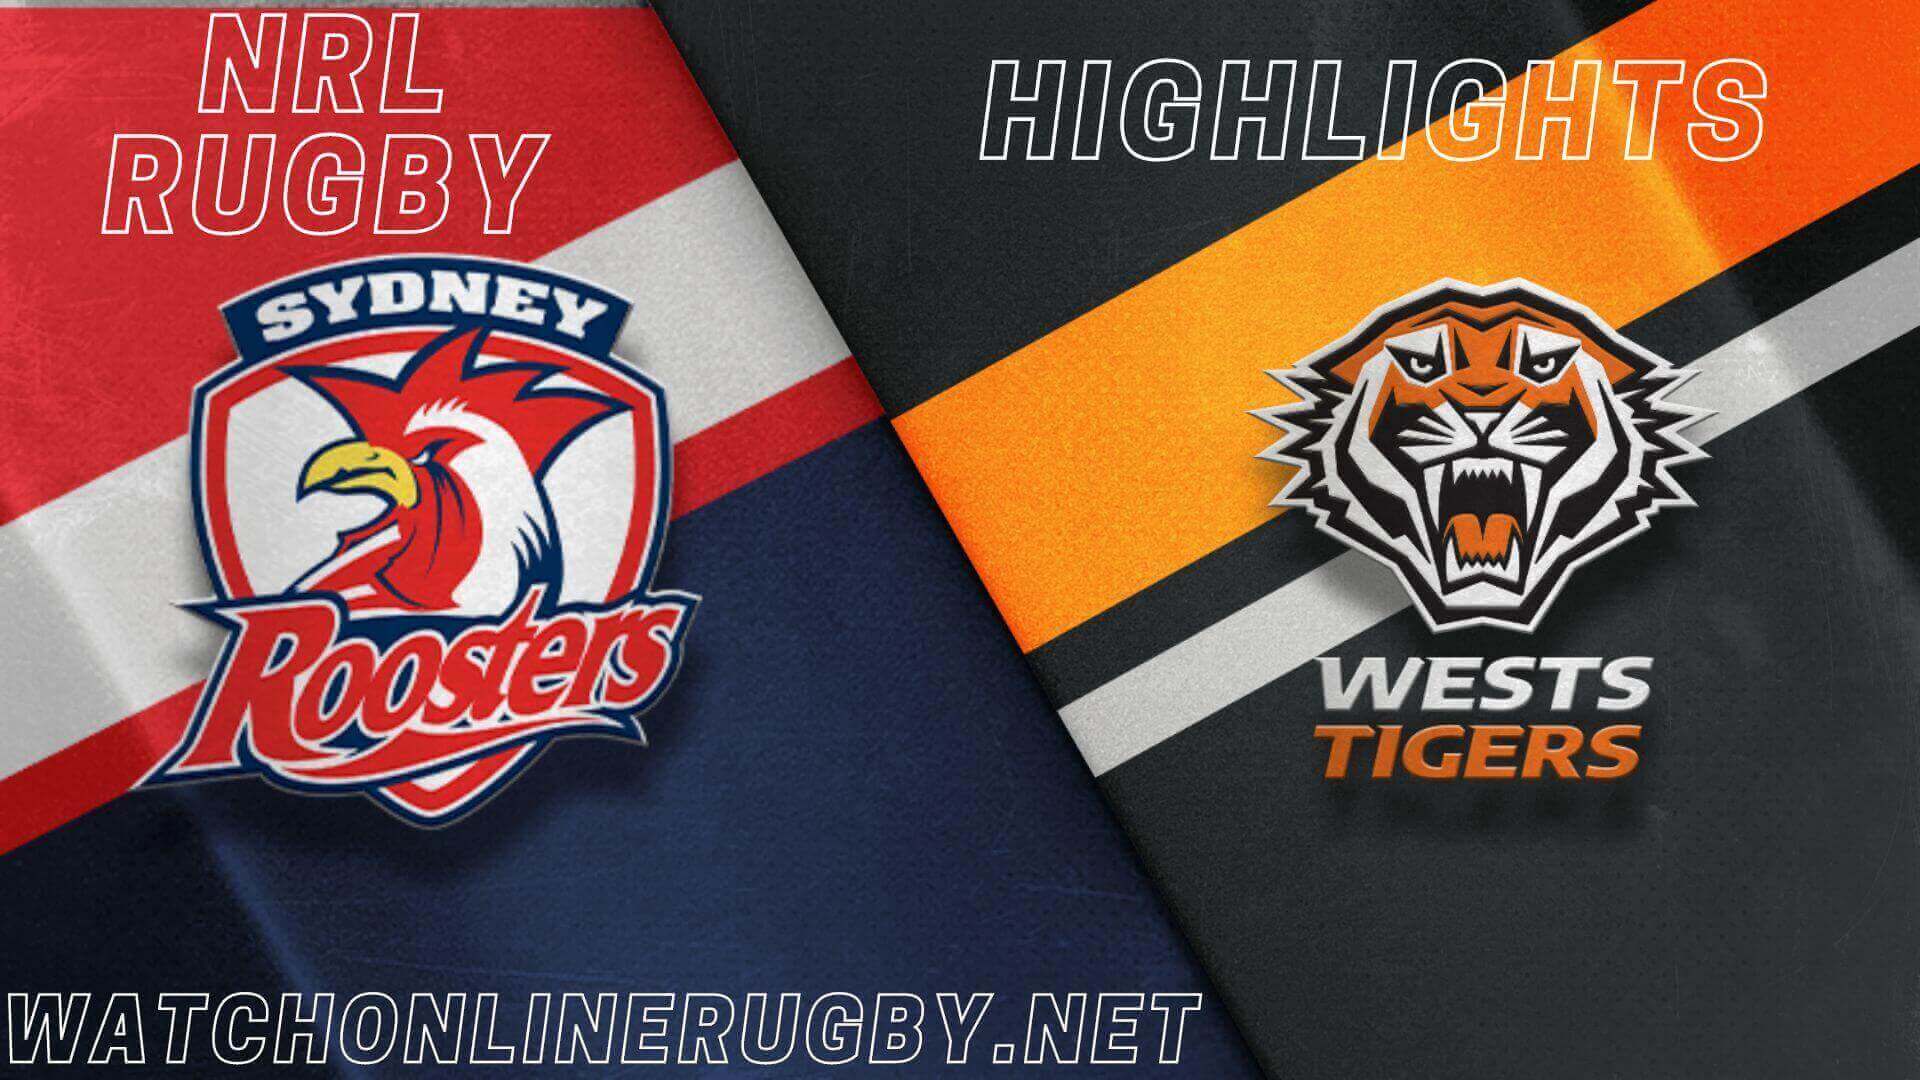 Roosters Vs Wests Tigers Highlights RD 23 NRL Rugby